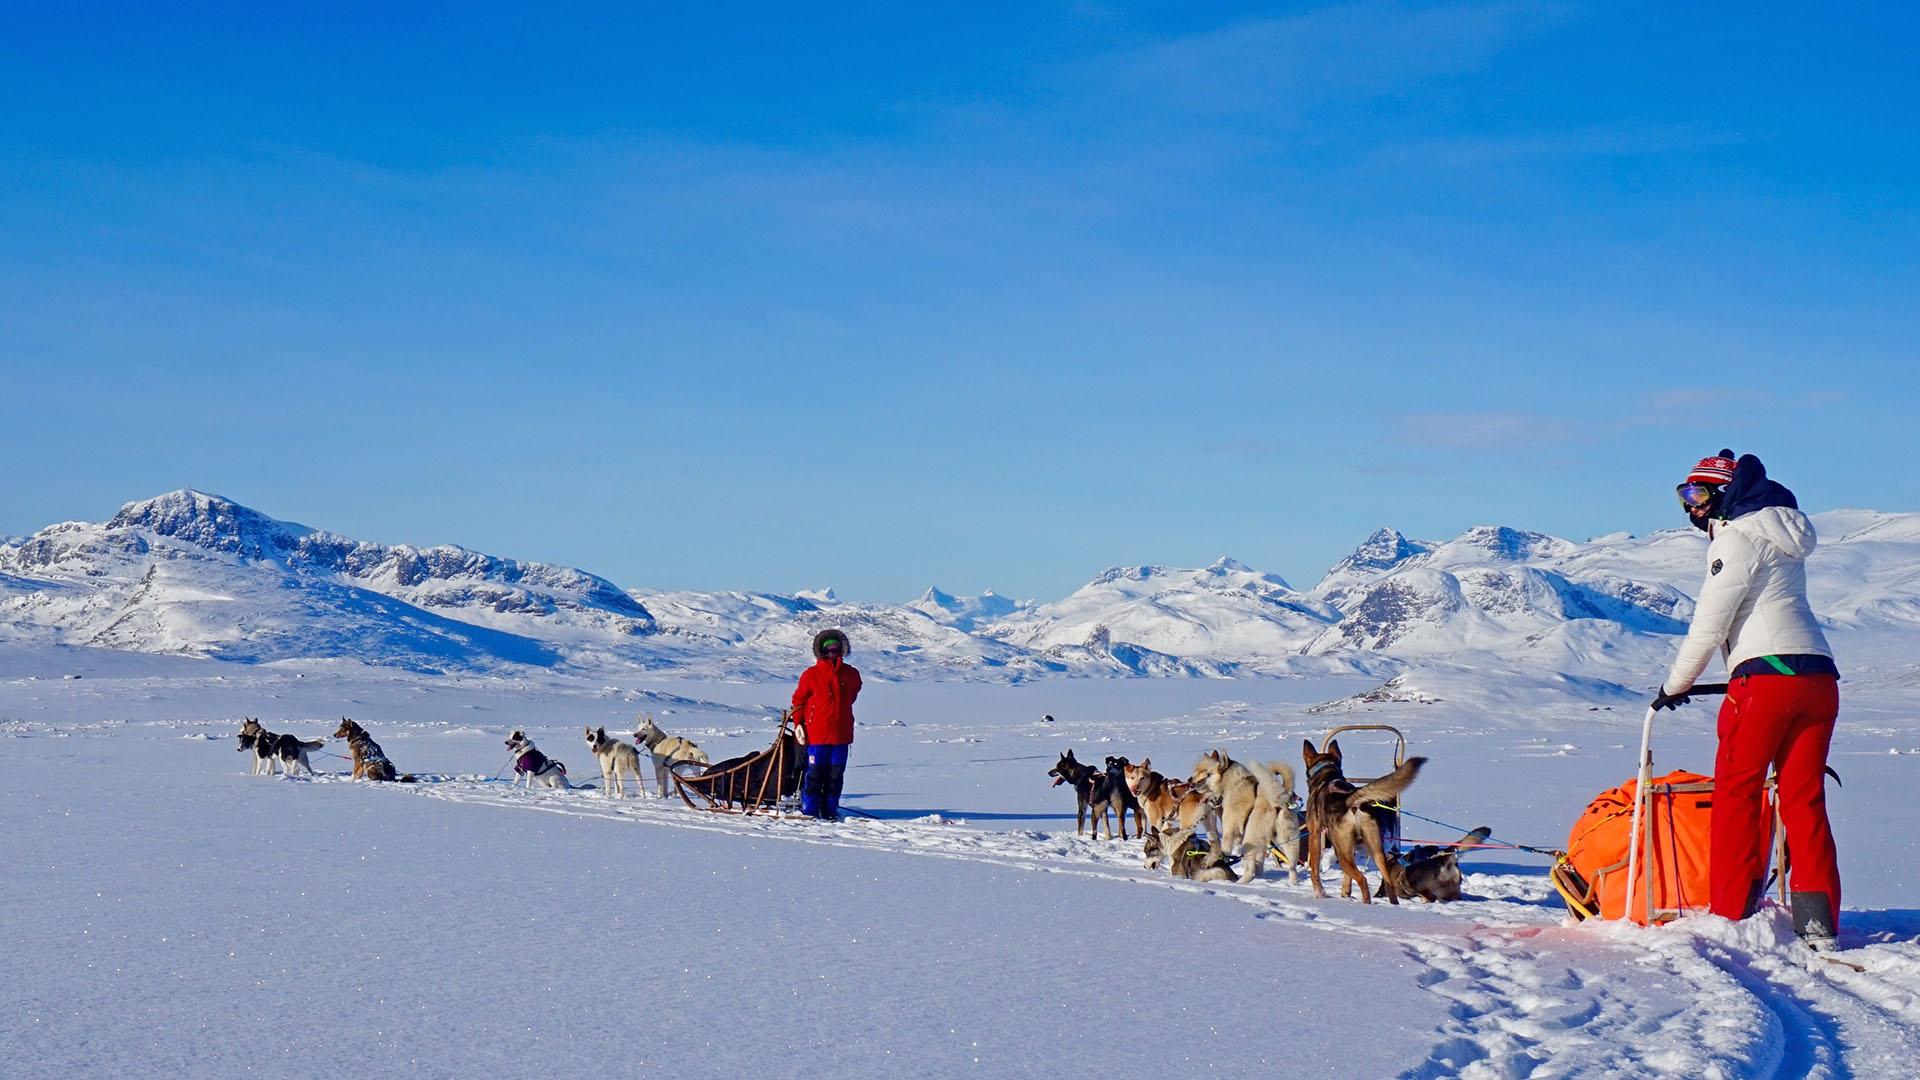 Two dog-sledding teams on a snow-covered mountain lake with high mountains in the background.